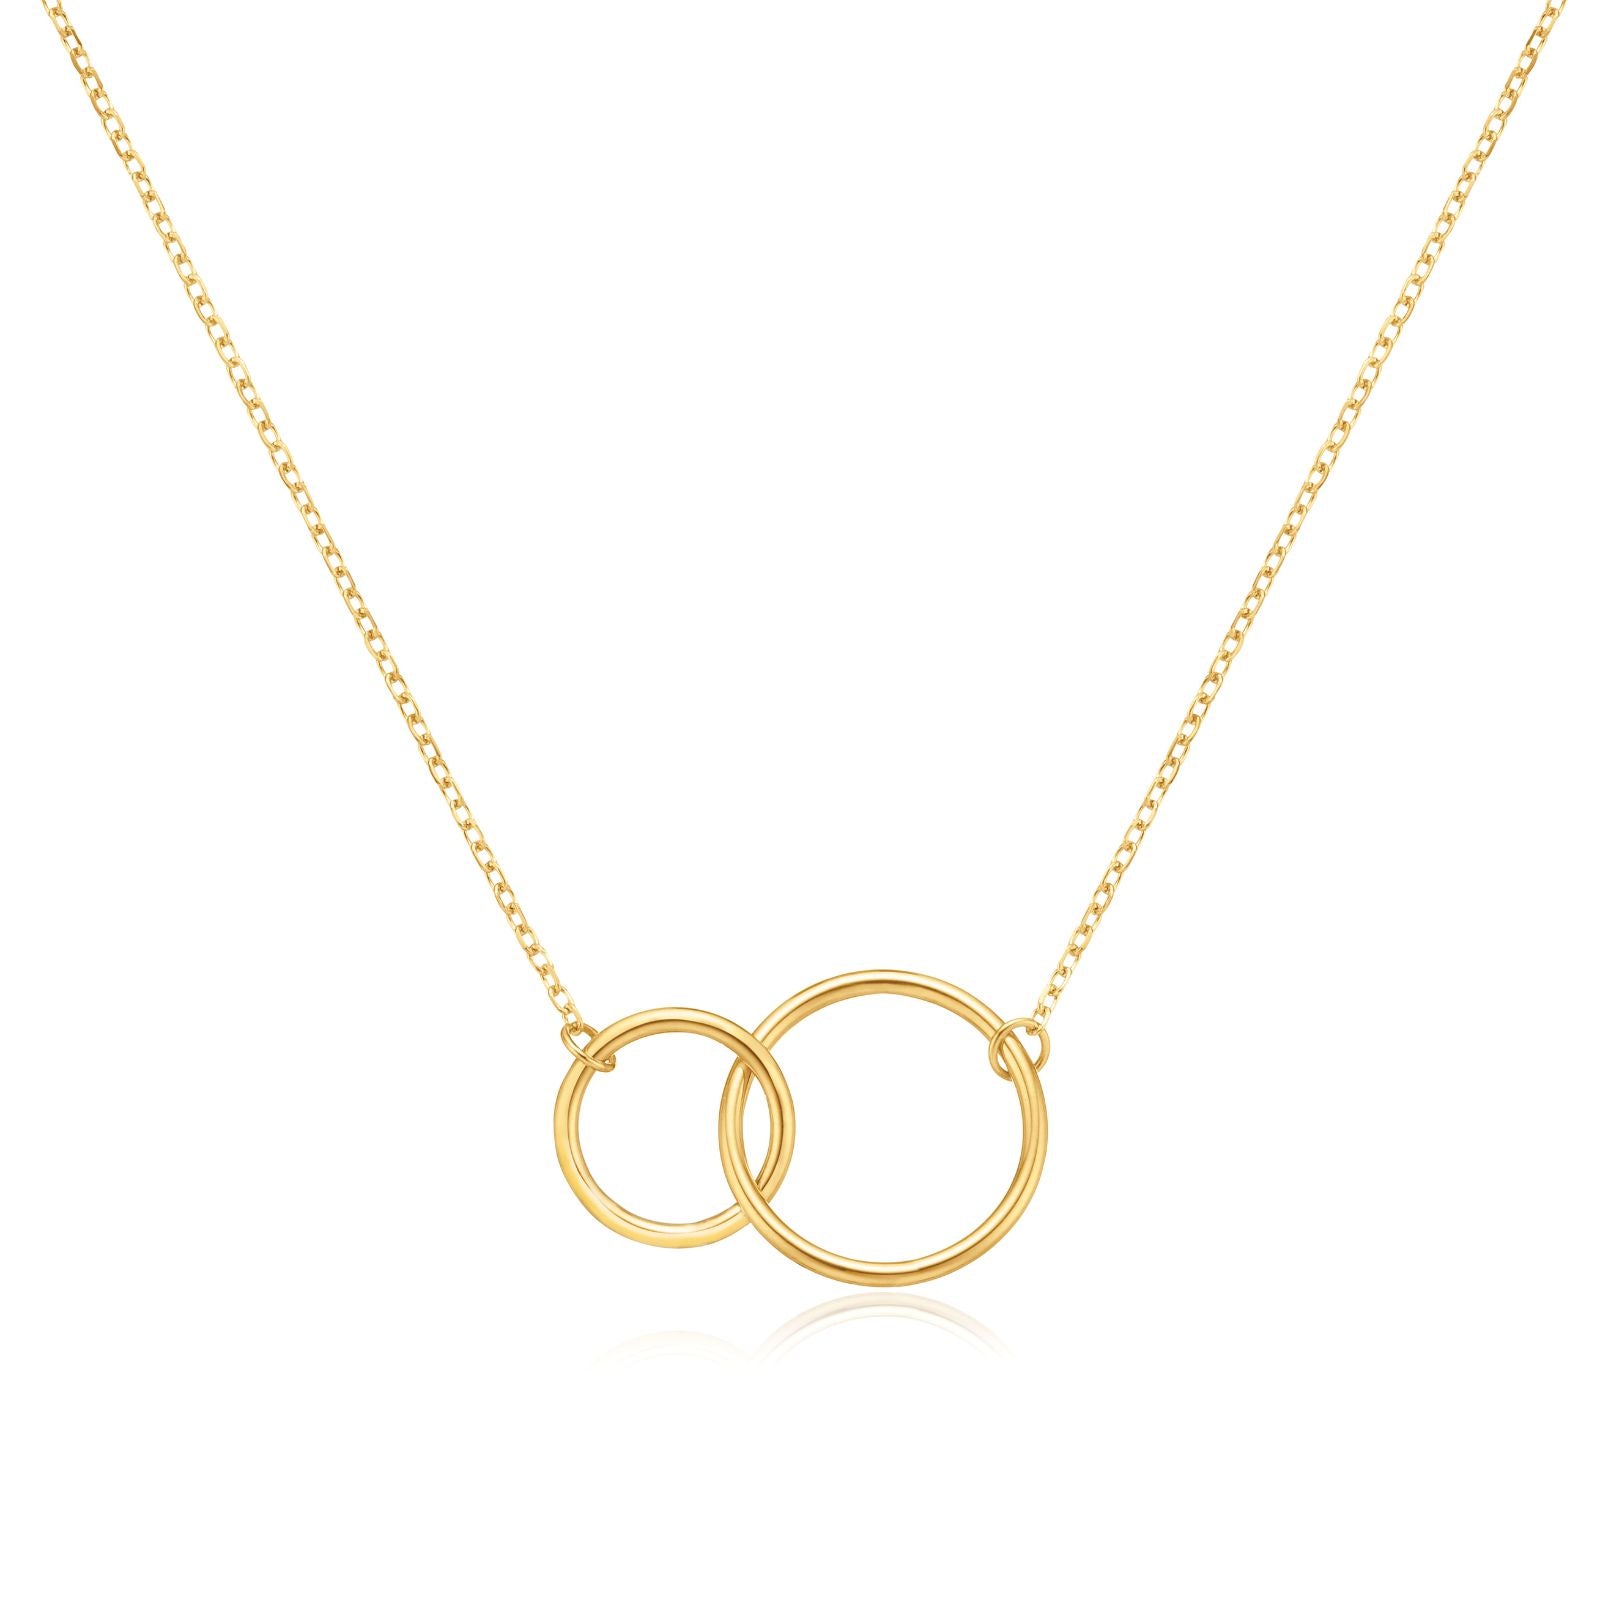 Entwined Circles Necklace in 14K and Sterling Silver — SR66SF